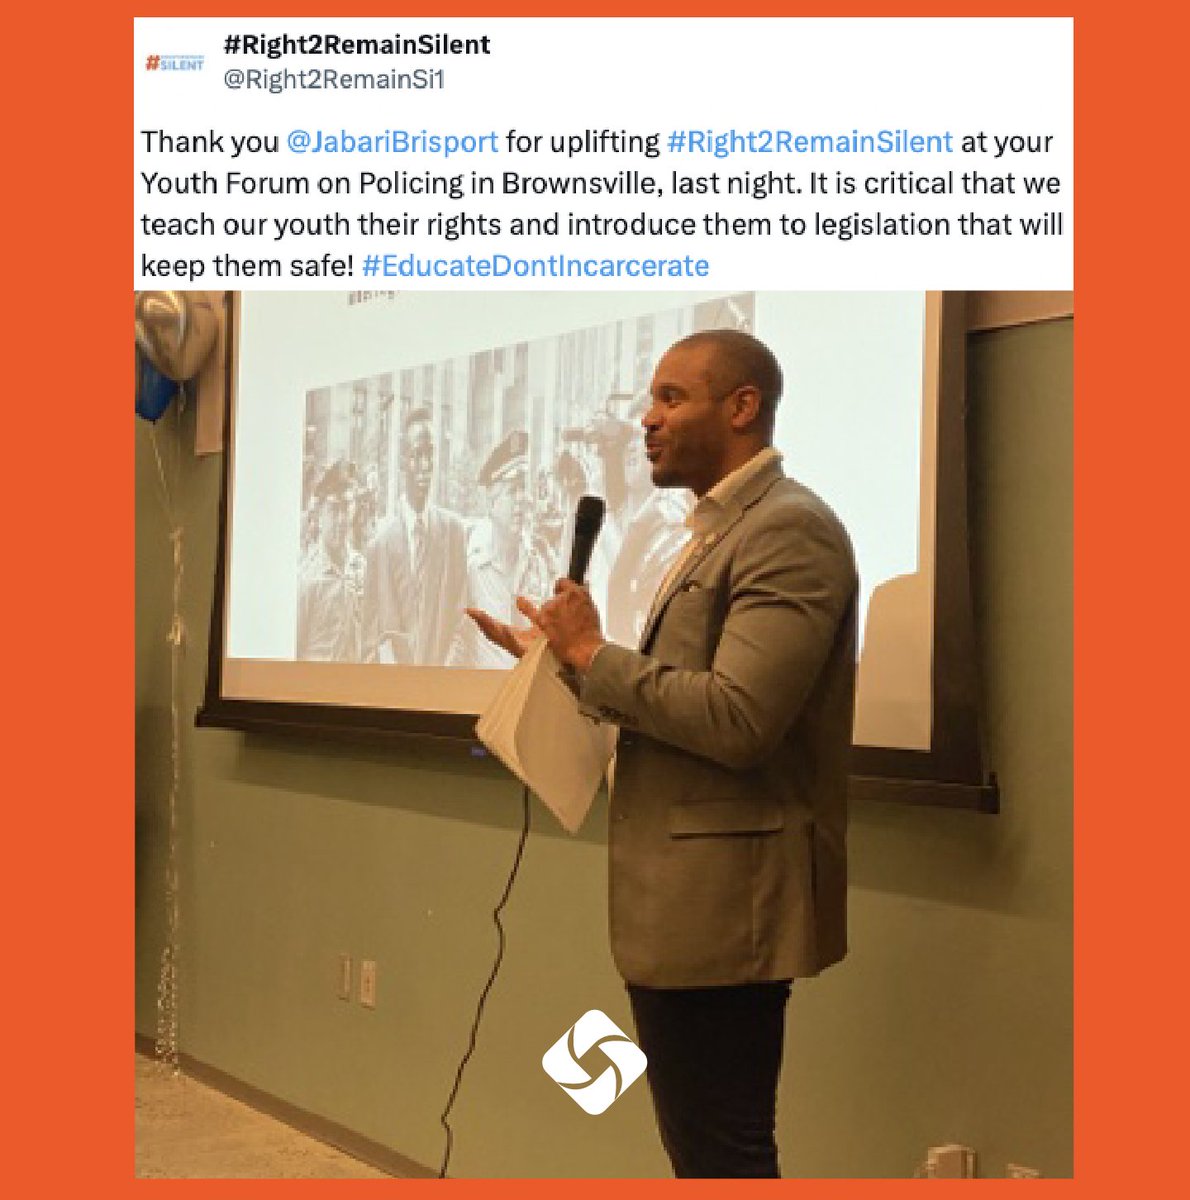 Shout out to @jabaribrisport for introducing #right2remainsilent at a recent Youth Forum on Policing in Brownsville. We're slowly getting the word out for youth to be read up on their rights and also empowered to have a voice in shaping legislation!